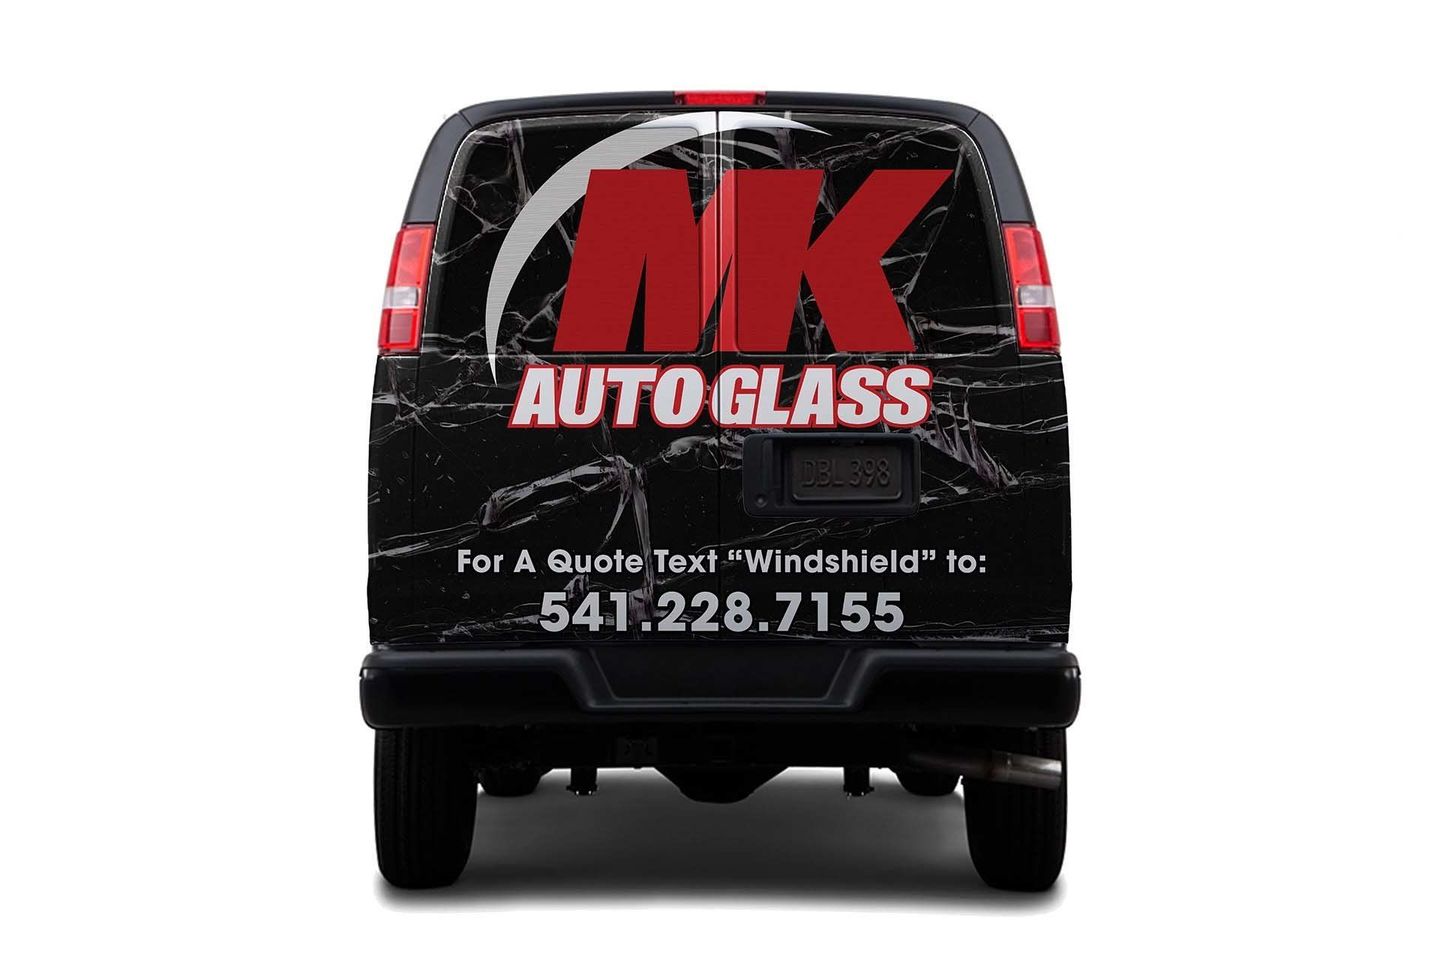 MK Auto Glass van used for free mobile services. 